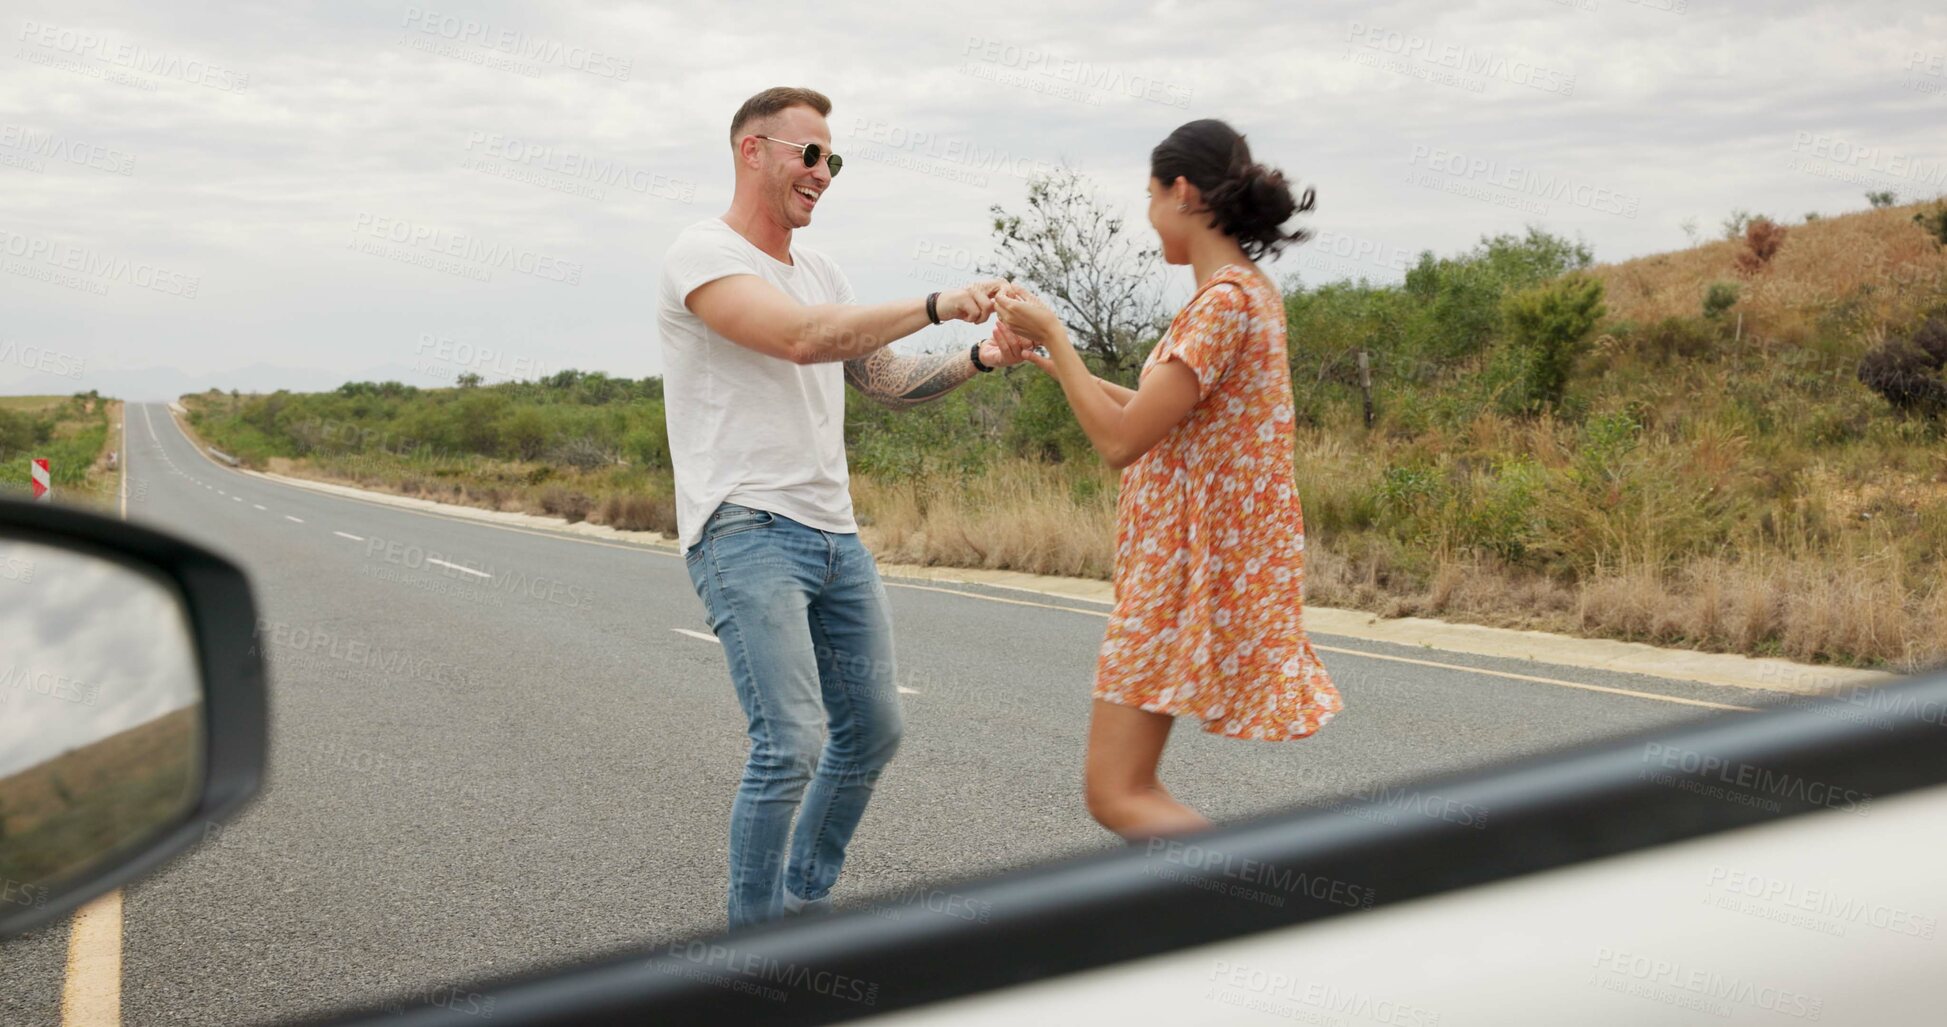 Buy stock photo Nature, dancing and young couple on road trip in countryside listening to music together. Happy, love and man and woman moving to song, playlist or radio by car on vacation, adventure or holiday.